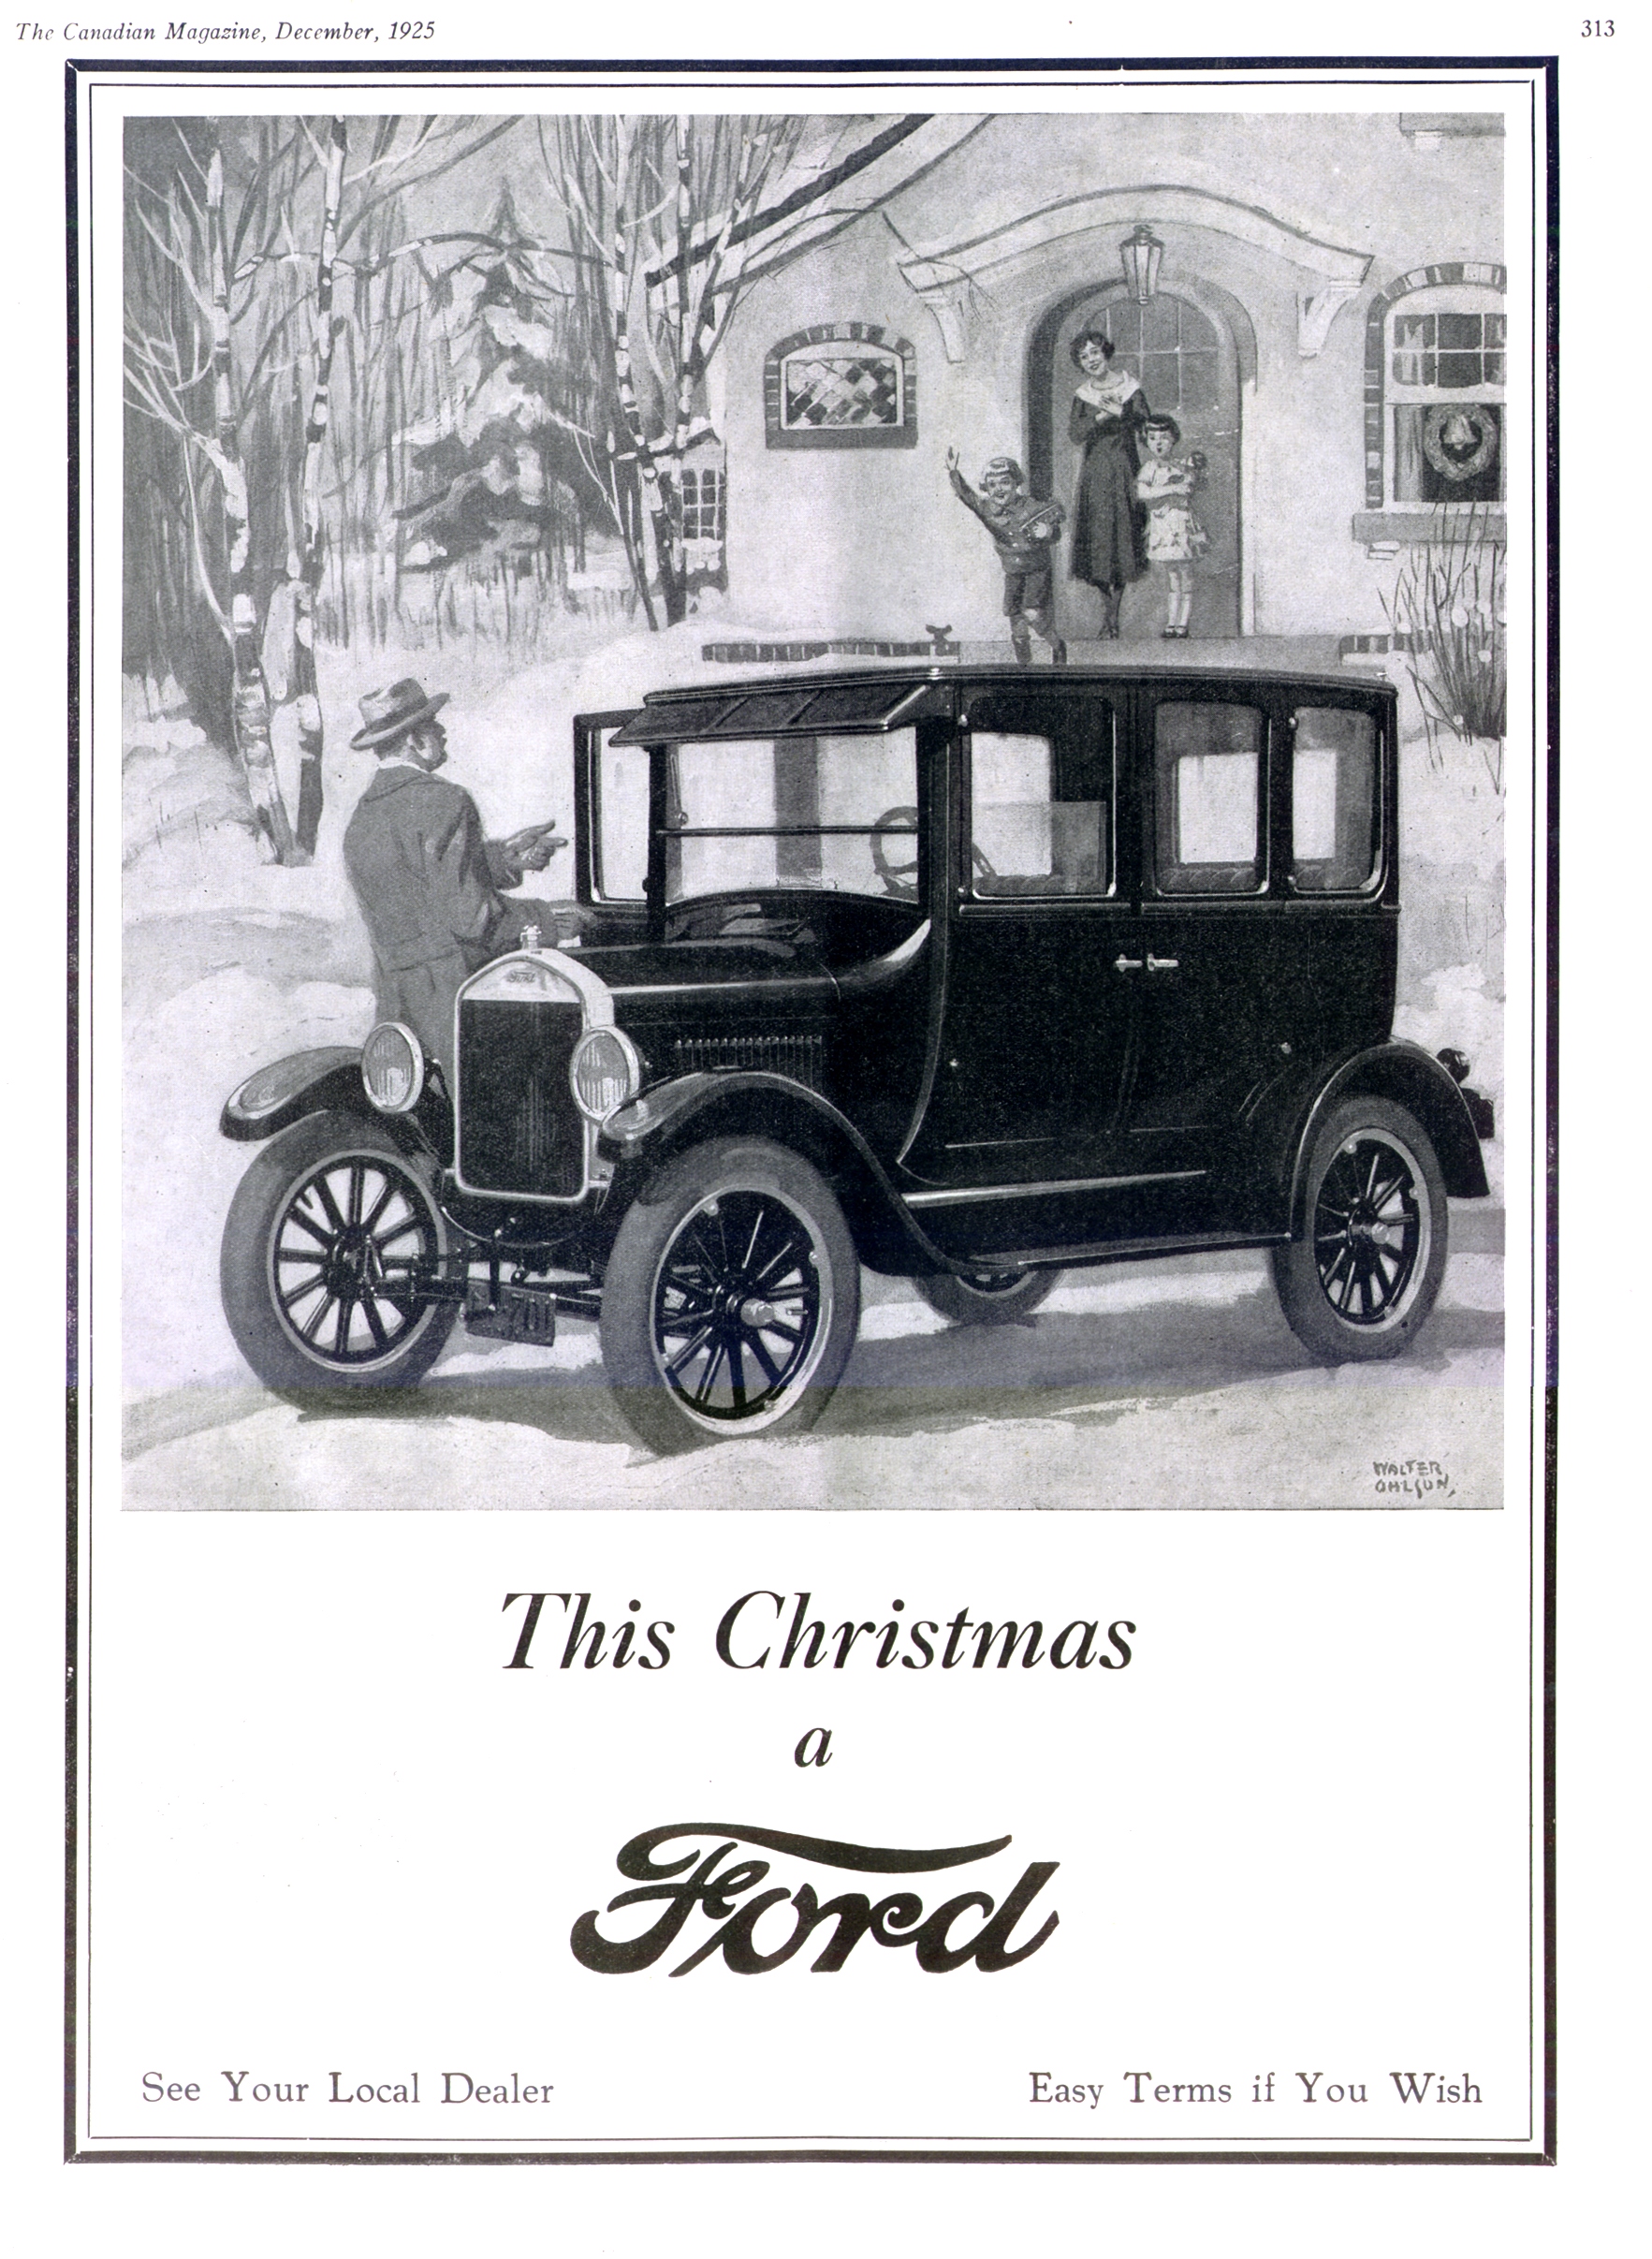 1926 Ford Auto Advertising